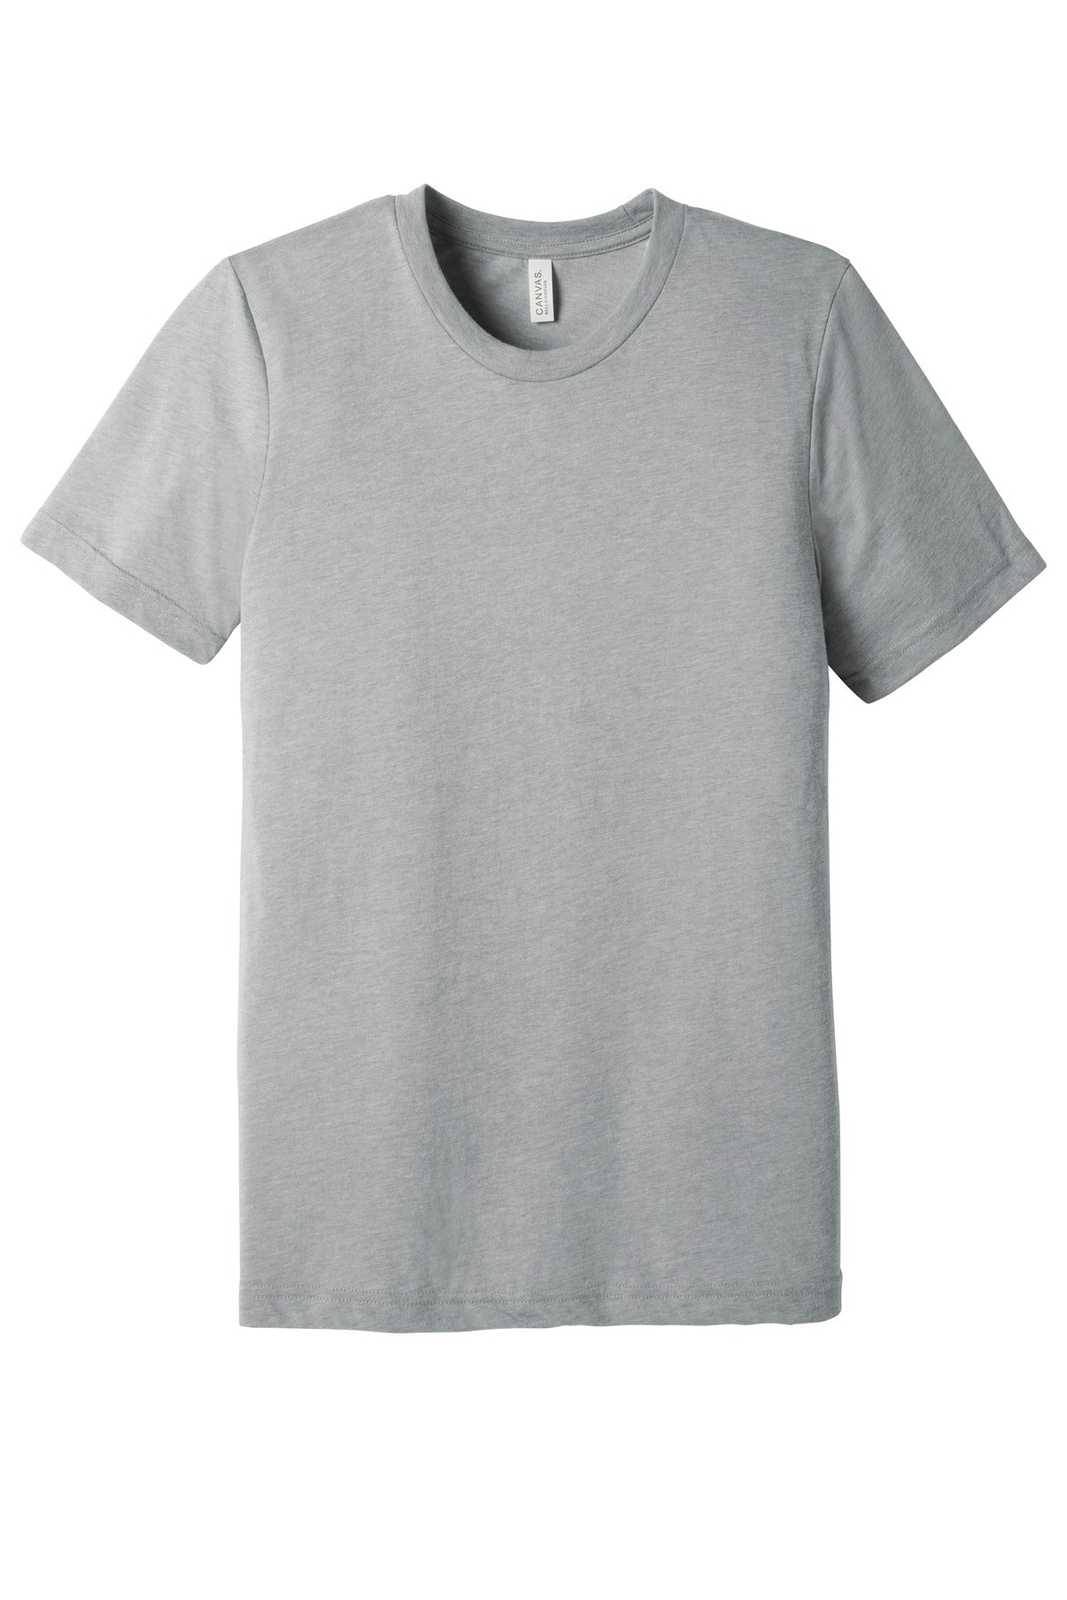 Bella + Canvas 3413 Unisex Triblend Short Sleeve Tee - Athletic Gray Triblend - HIT a Double